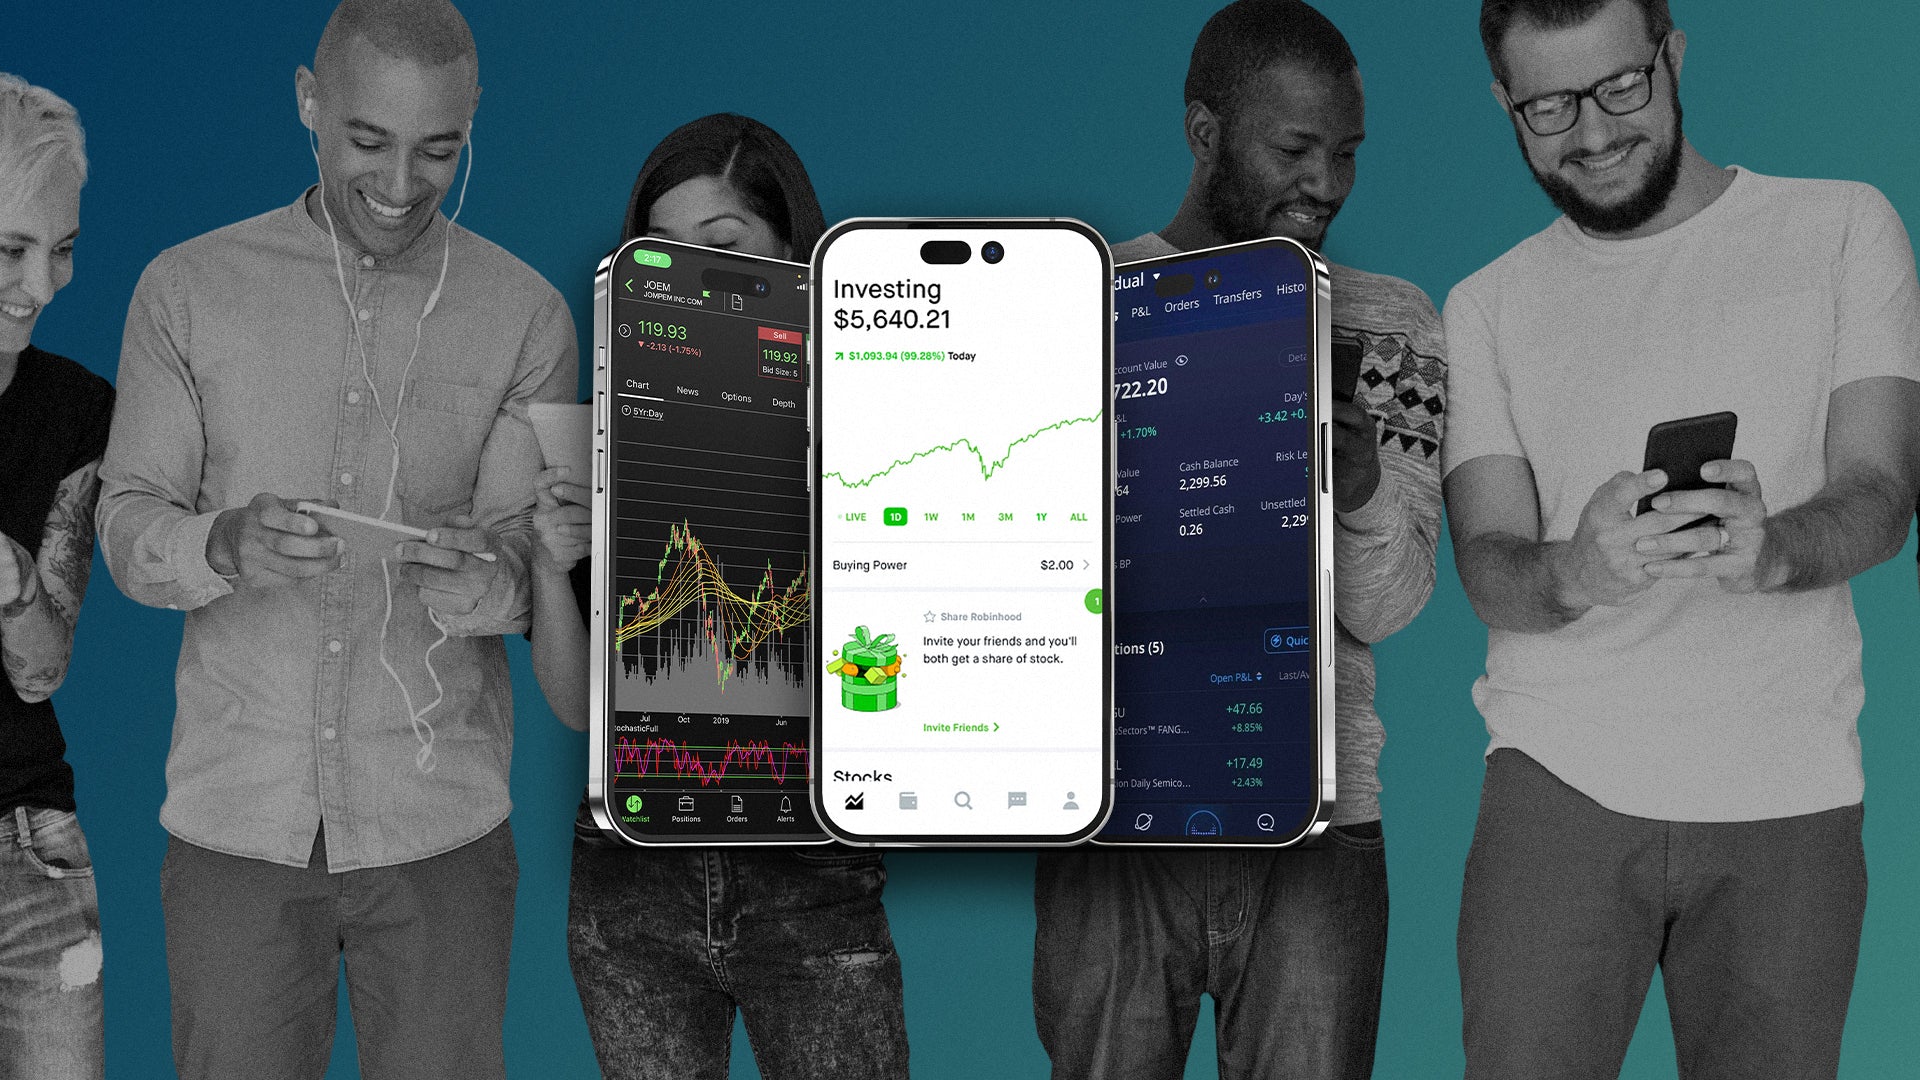 3 popular trading apps that Millenials and Gen Z use